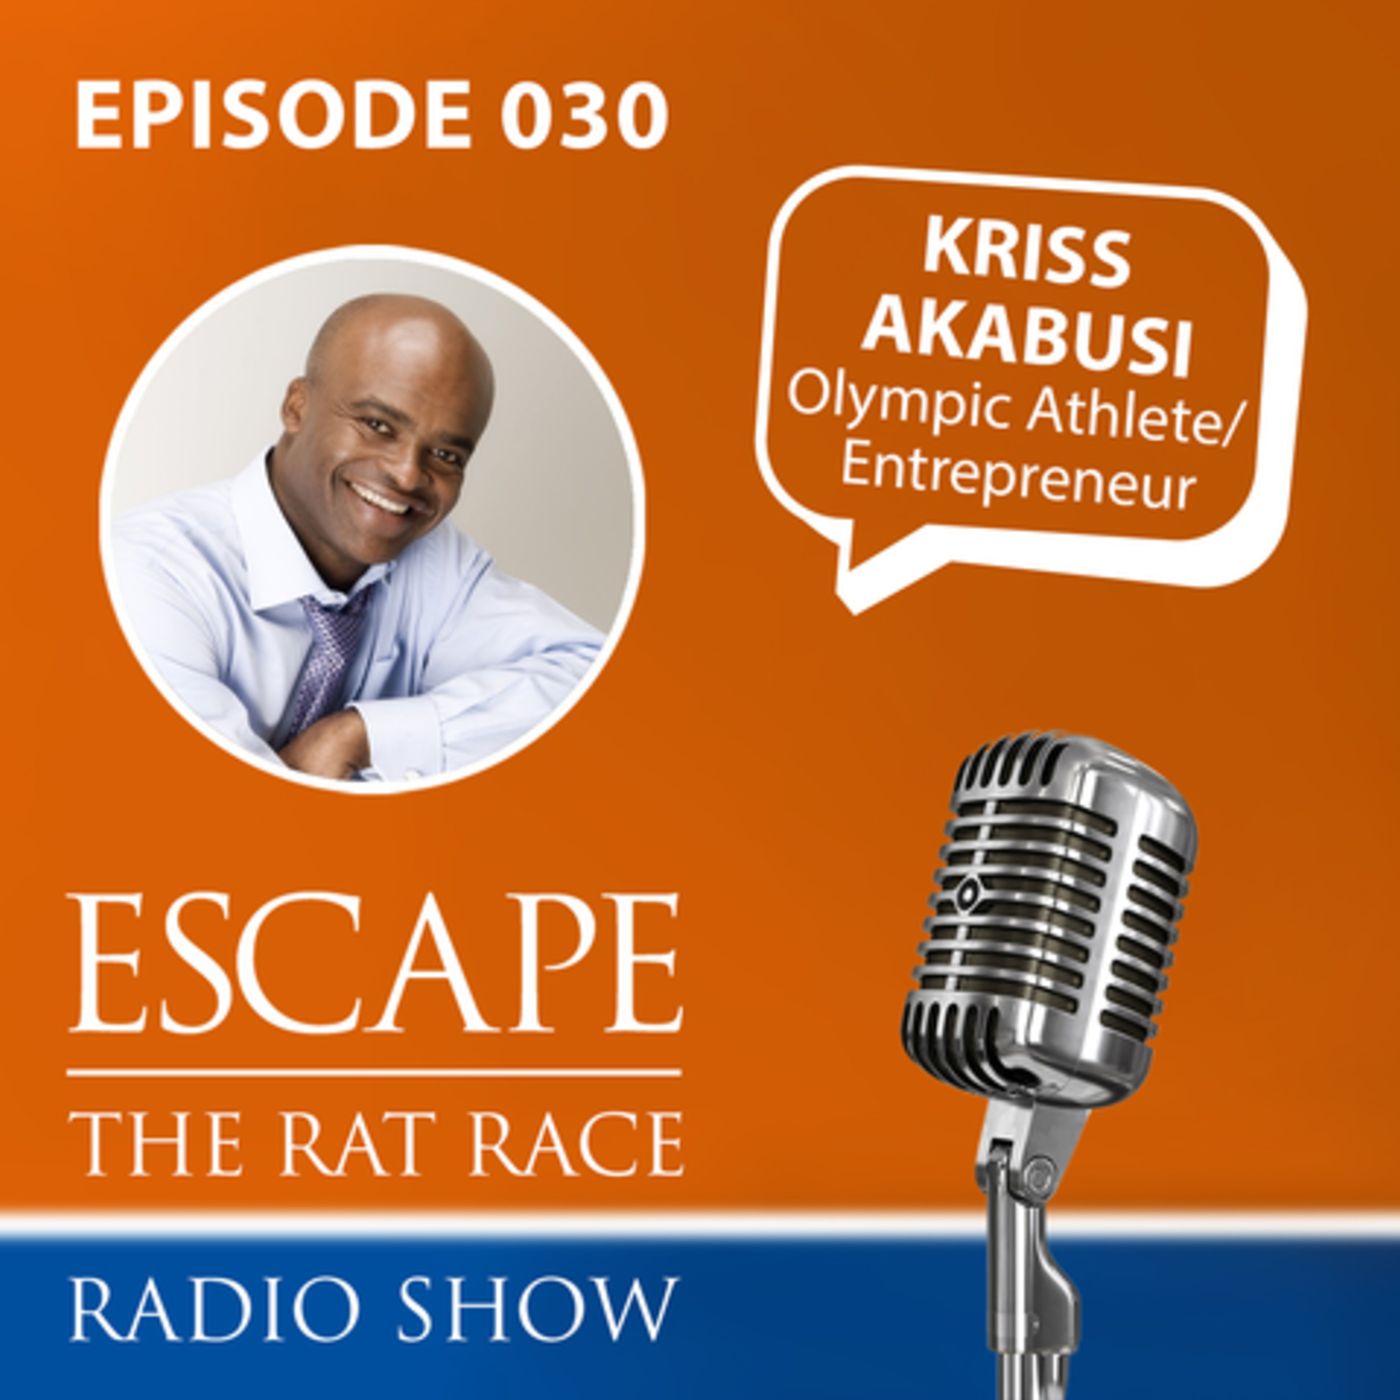 Kriss Akabusi - The Power of Self Belief and Dreaming Big